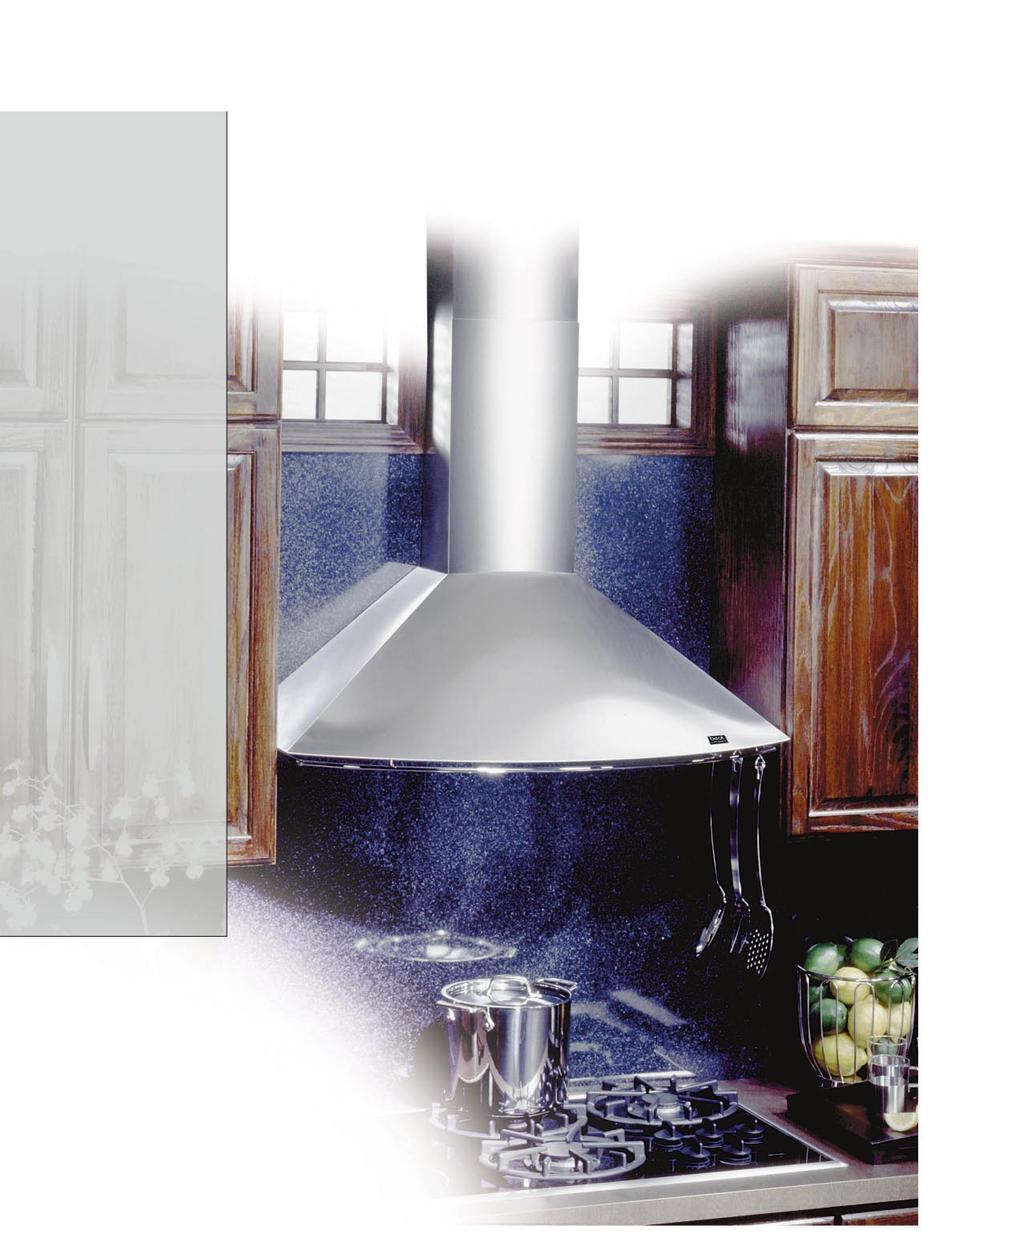 CHIMNEY HOODS K273 A mix of curves and angles shape the canopy and chimney Integral utensil rail adds a distinctive highlight and functional convenience Choose brushed stainless, or two durable